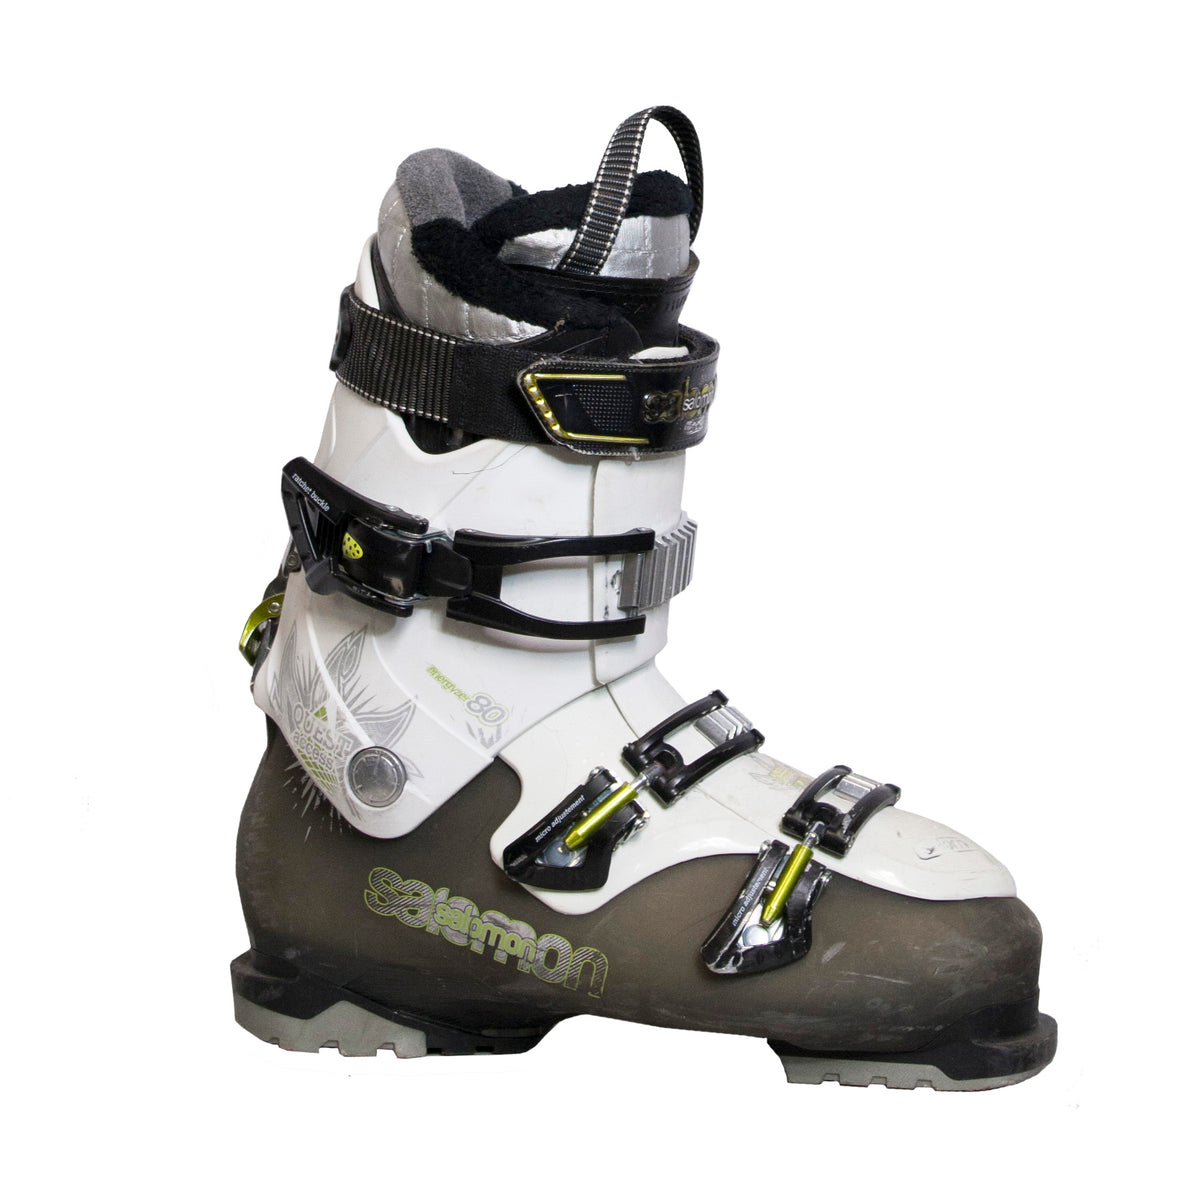 Orphan eksplodere kasket Used Salomon Quest Access 80 Ski Boots - Galactic Snow Sports